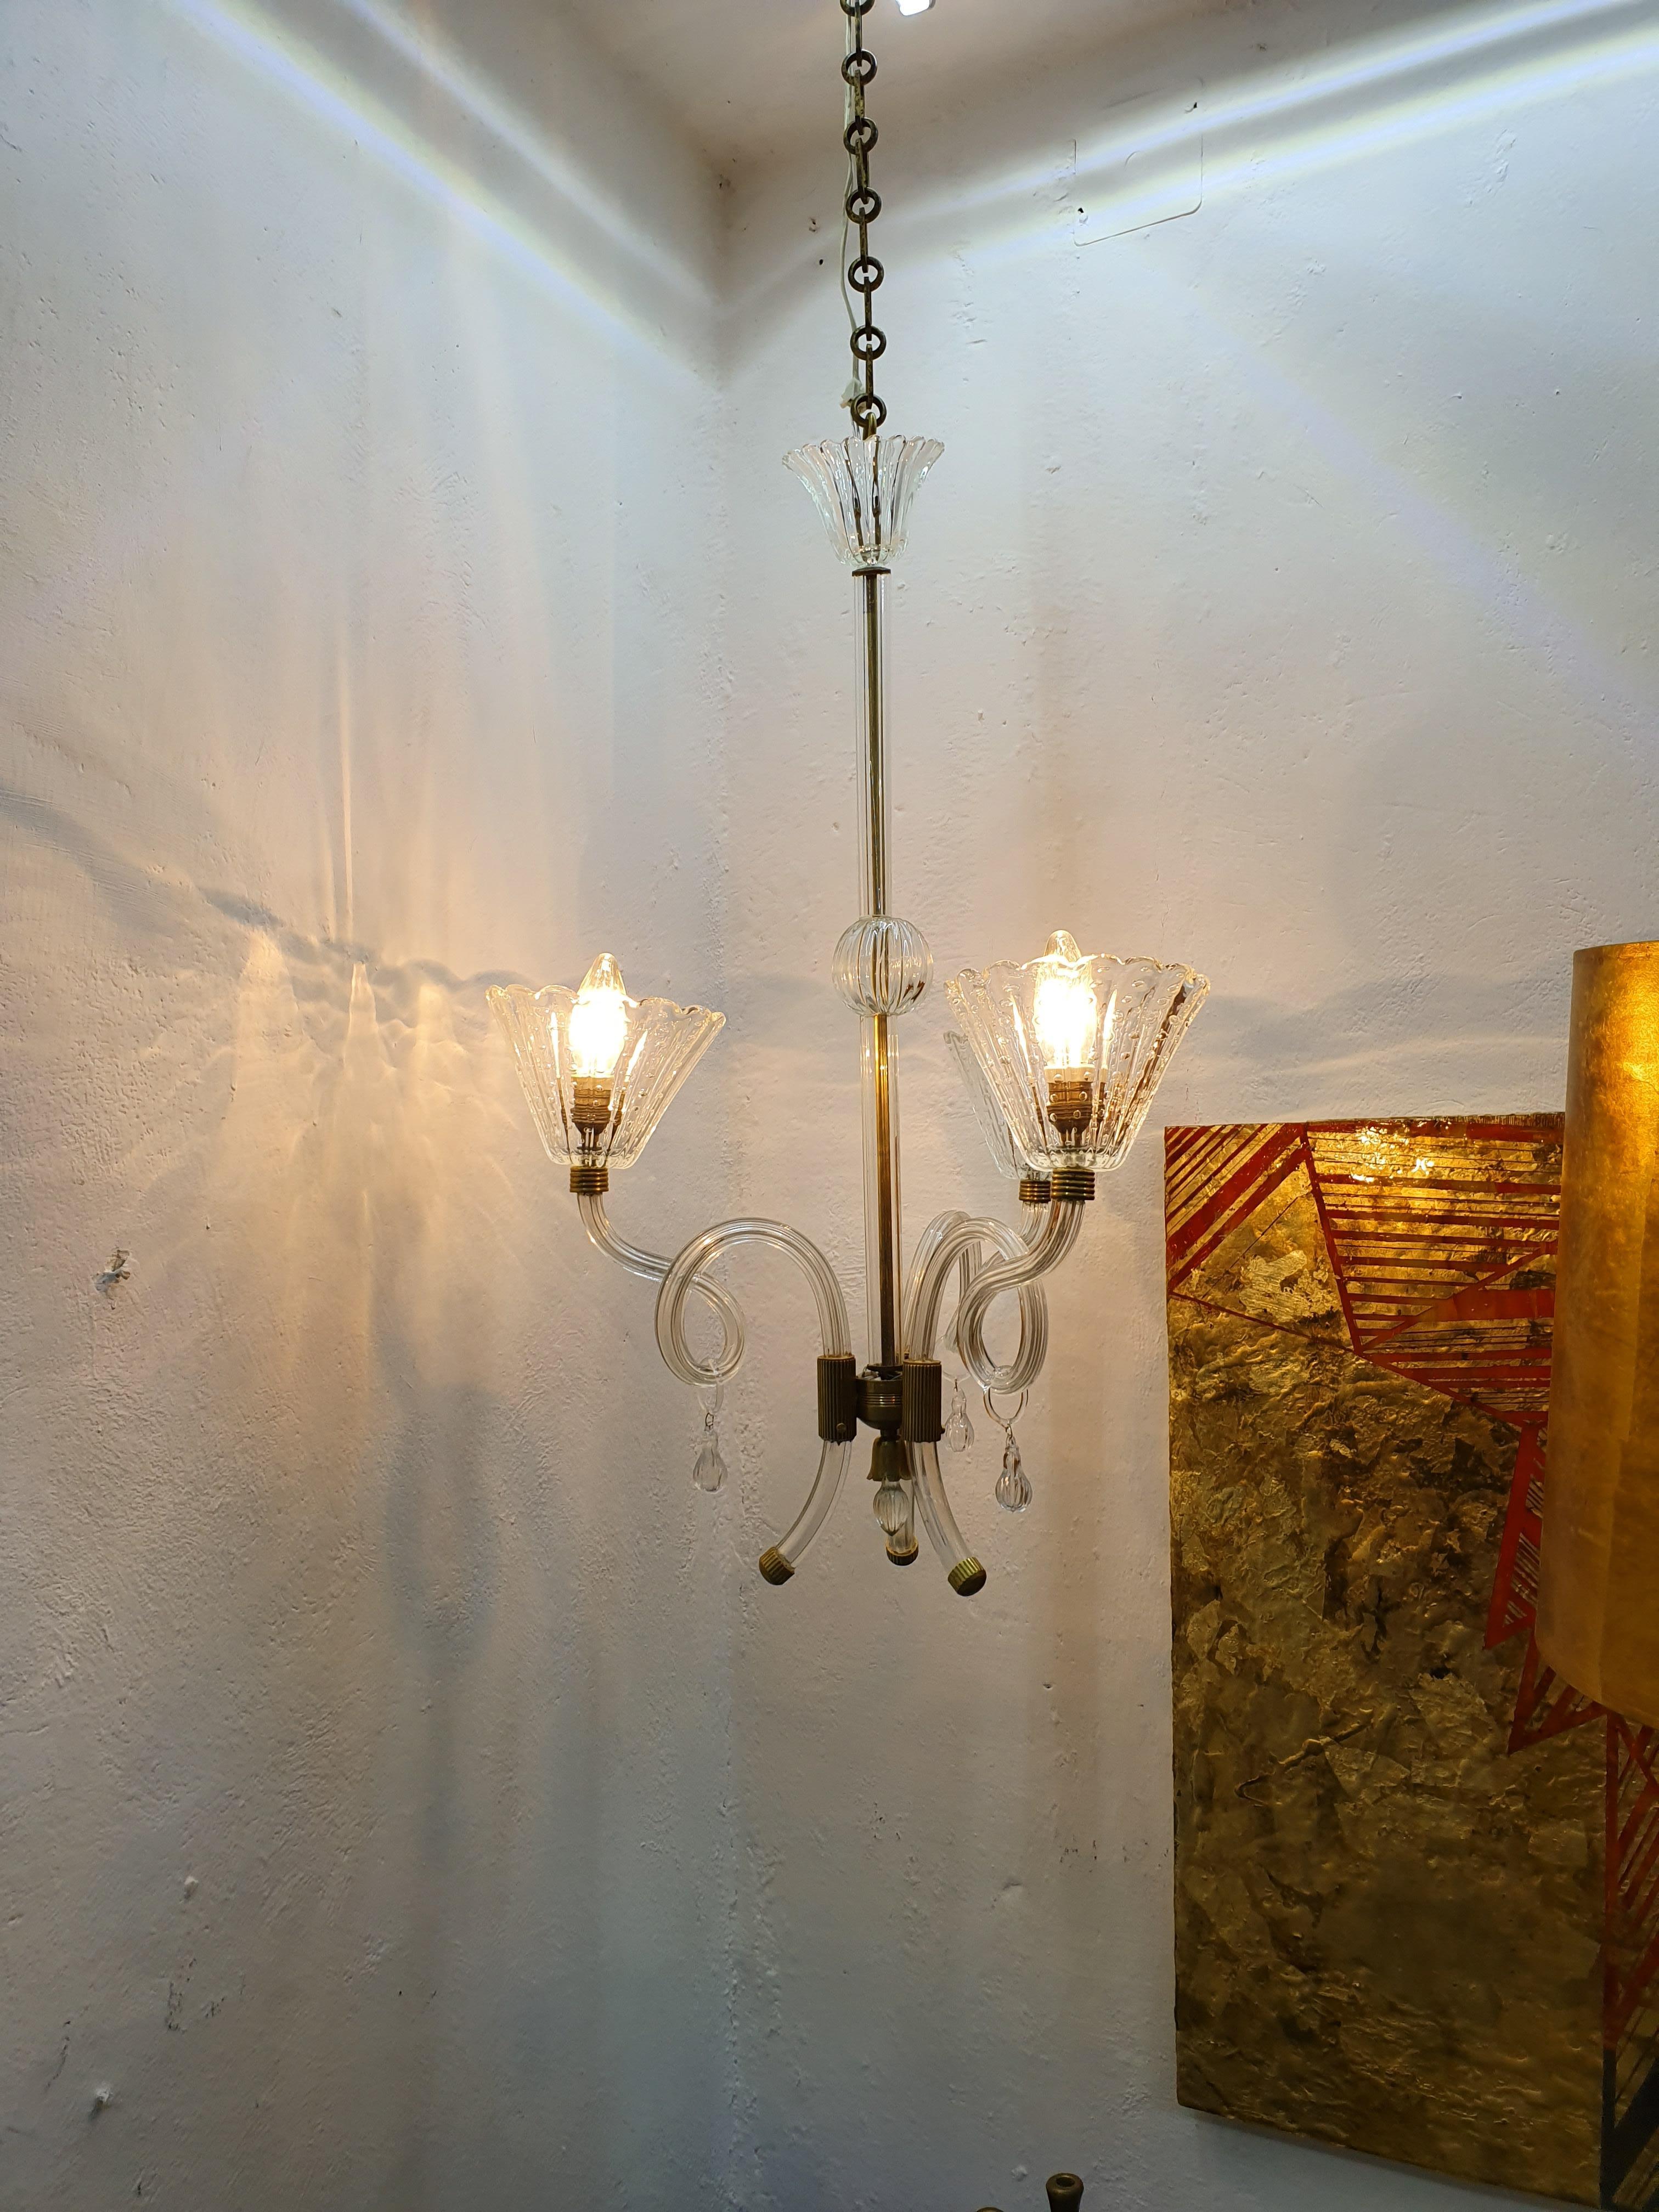 Mid-Century Modern Chandelier by Barovier Toso in Murano Glass, Italy circa 1950 For Sale 8